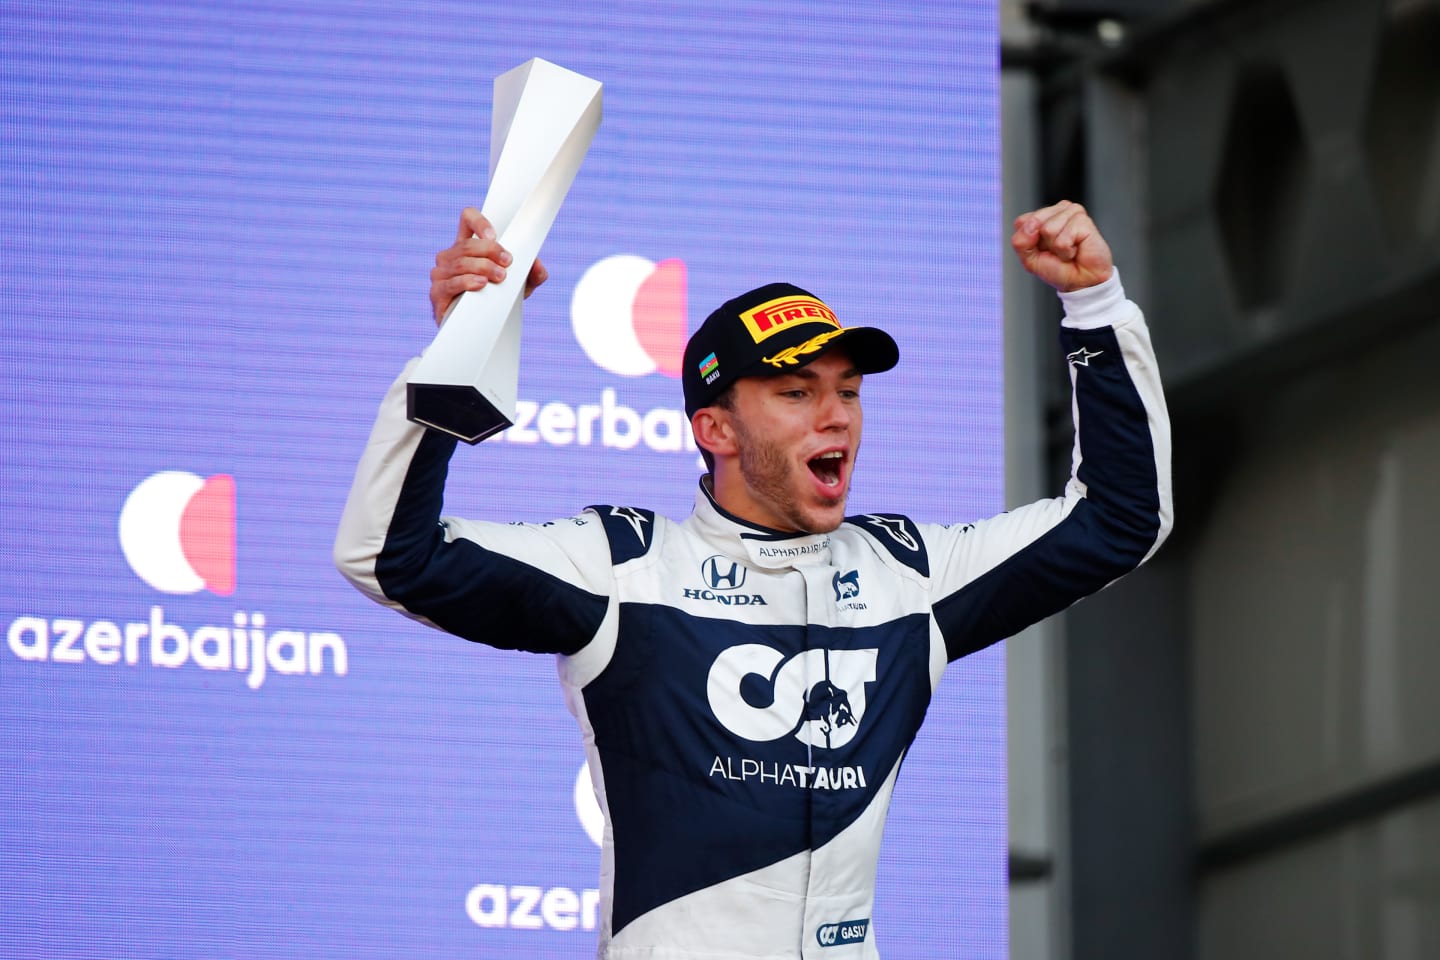 BAKU, AZERBAIJAN - JUNE 06: Third placed Pierre Gasly of France and Scuderia AlphaTauri celebrates on the podium during the F1 Grand Prix of Azerbaijan at Baku City Circuit on June 06, 2021 in Baku, Azerbaijan. (Photo by Maxim Shemetov - Pool/Getty Images)